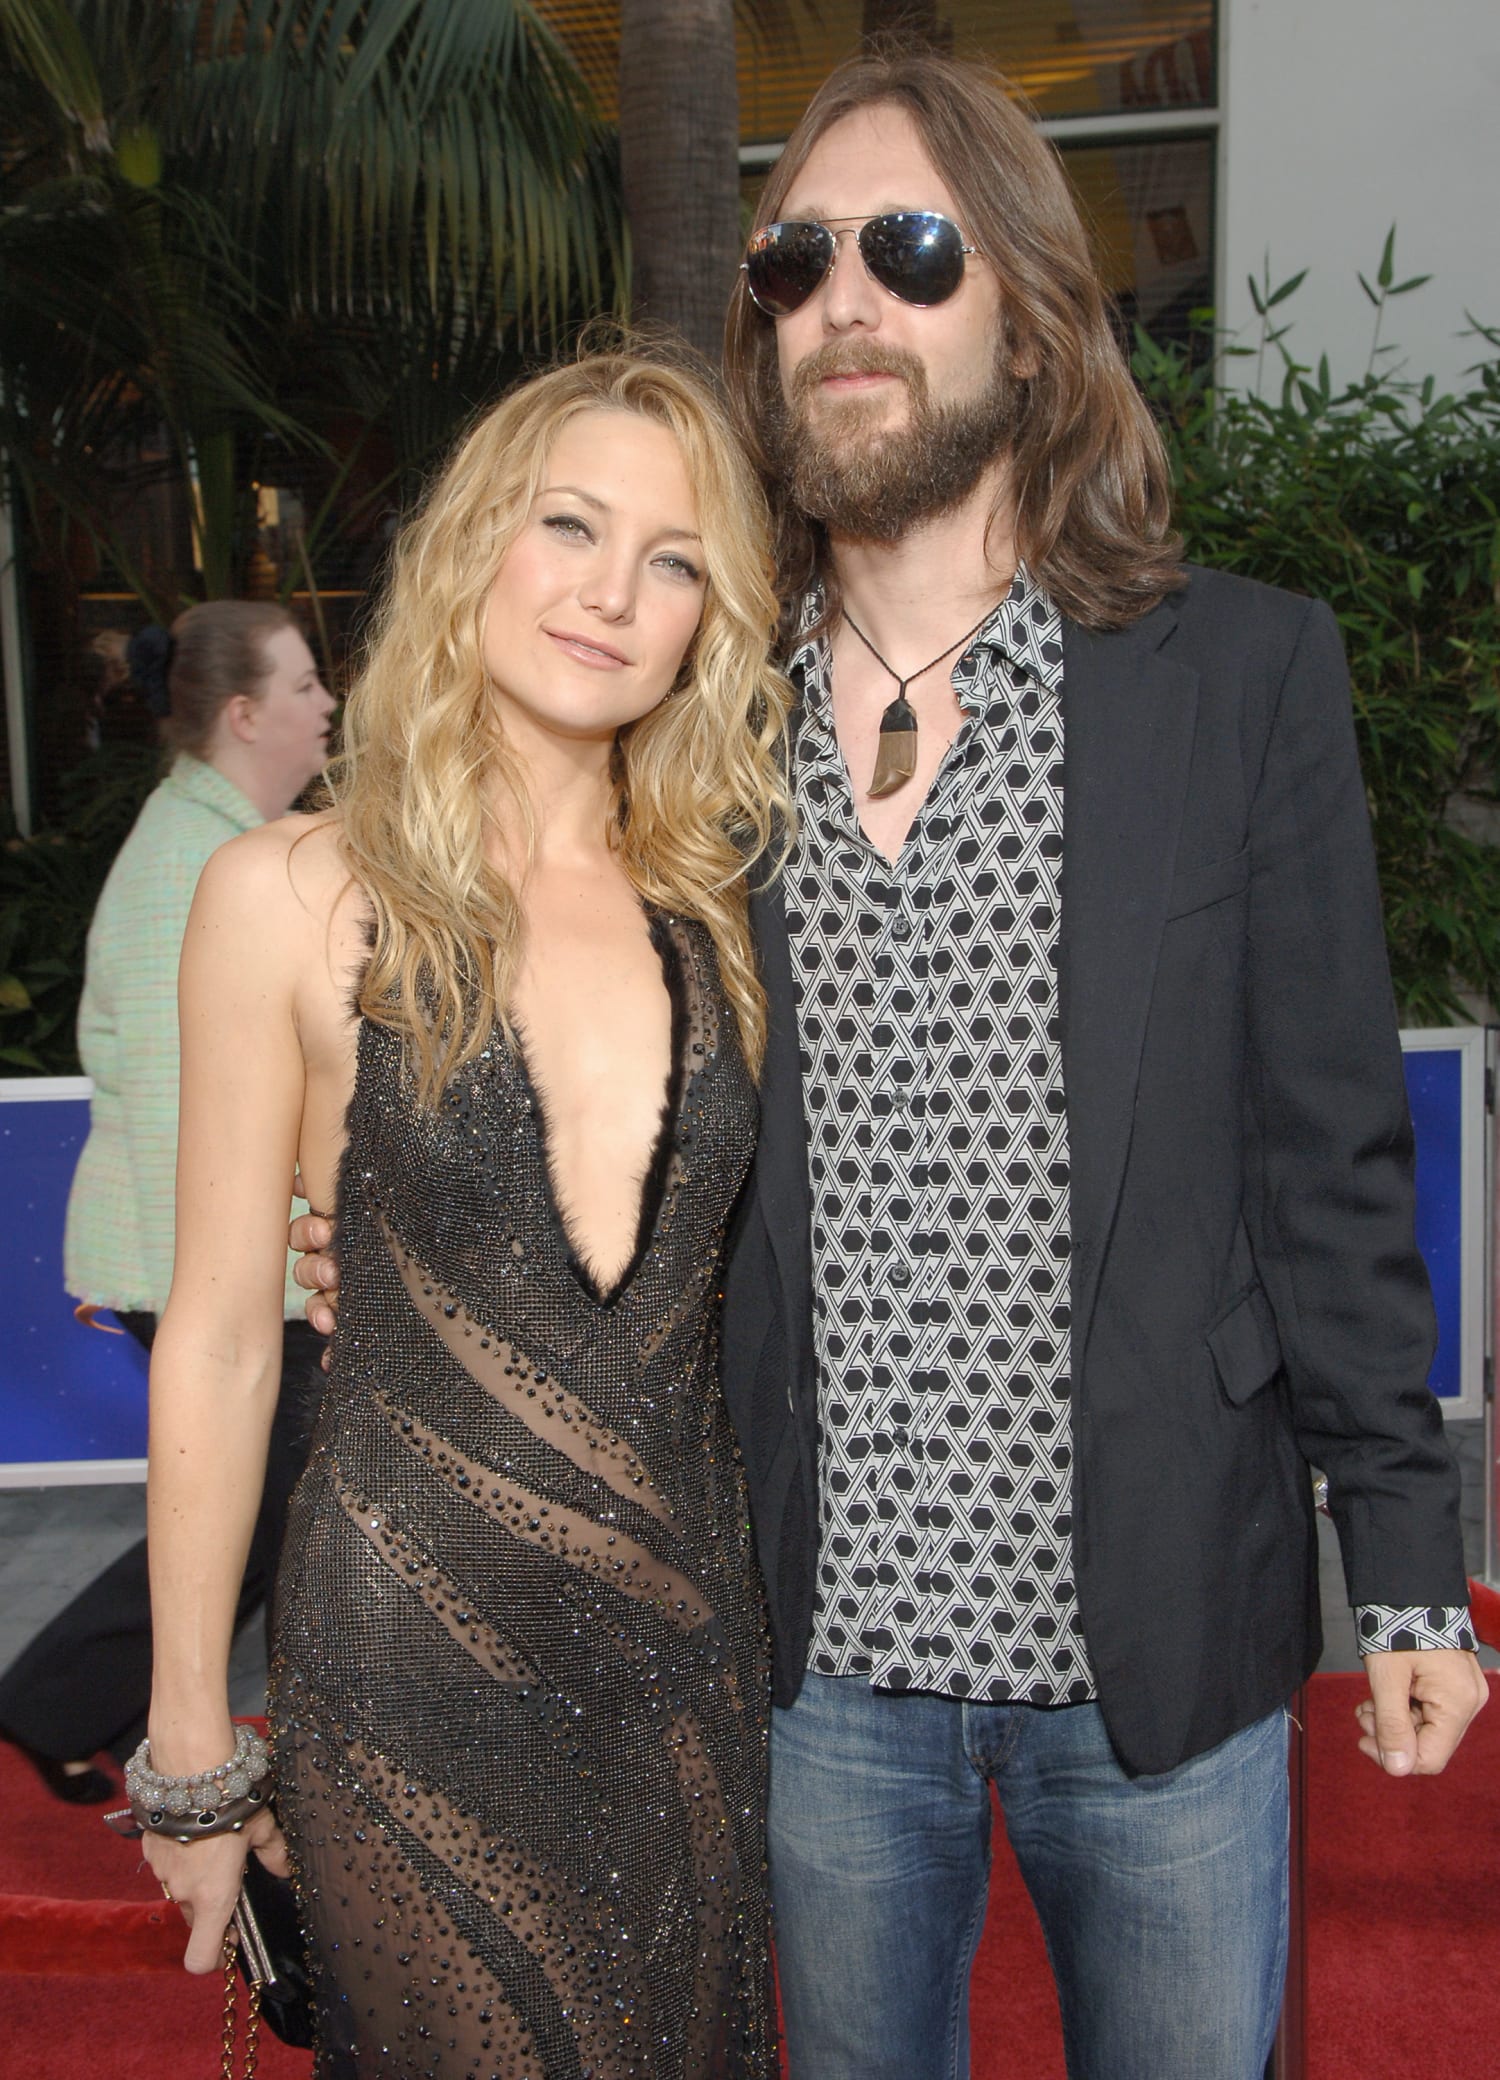 Kate Hudson On She Married Chris Robinson at 21